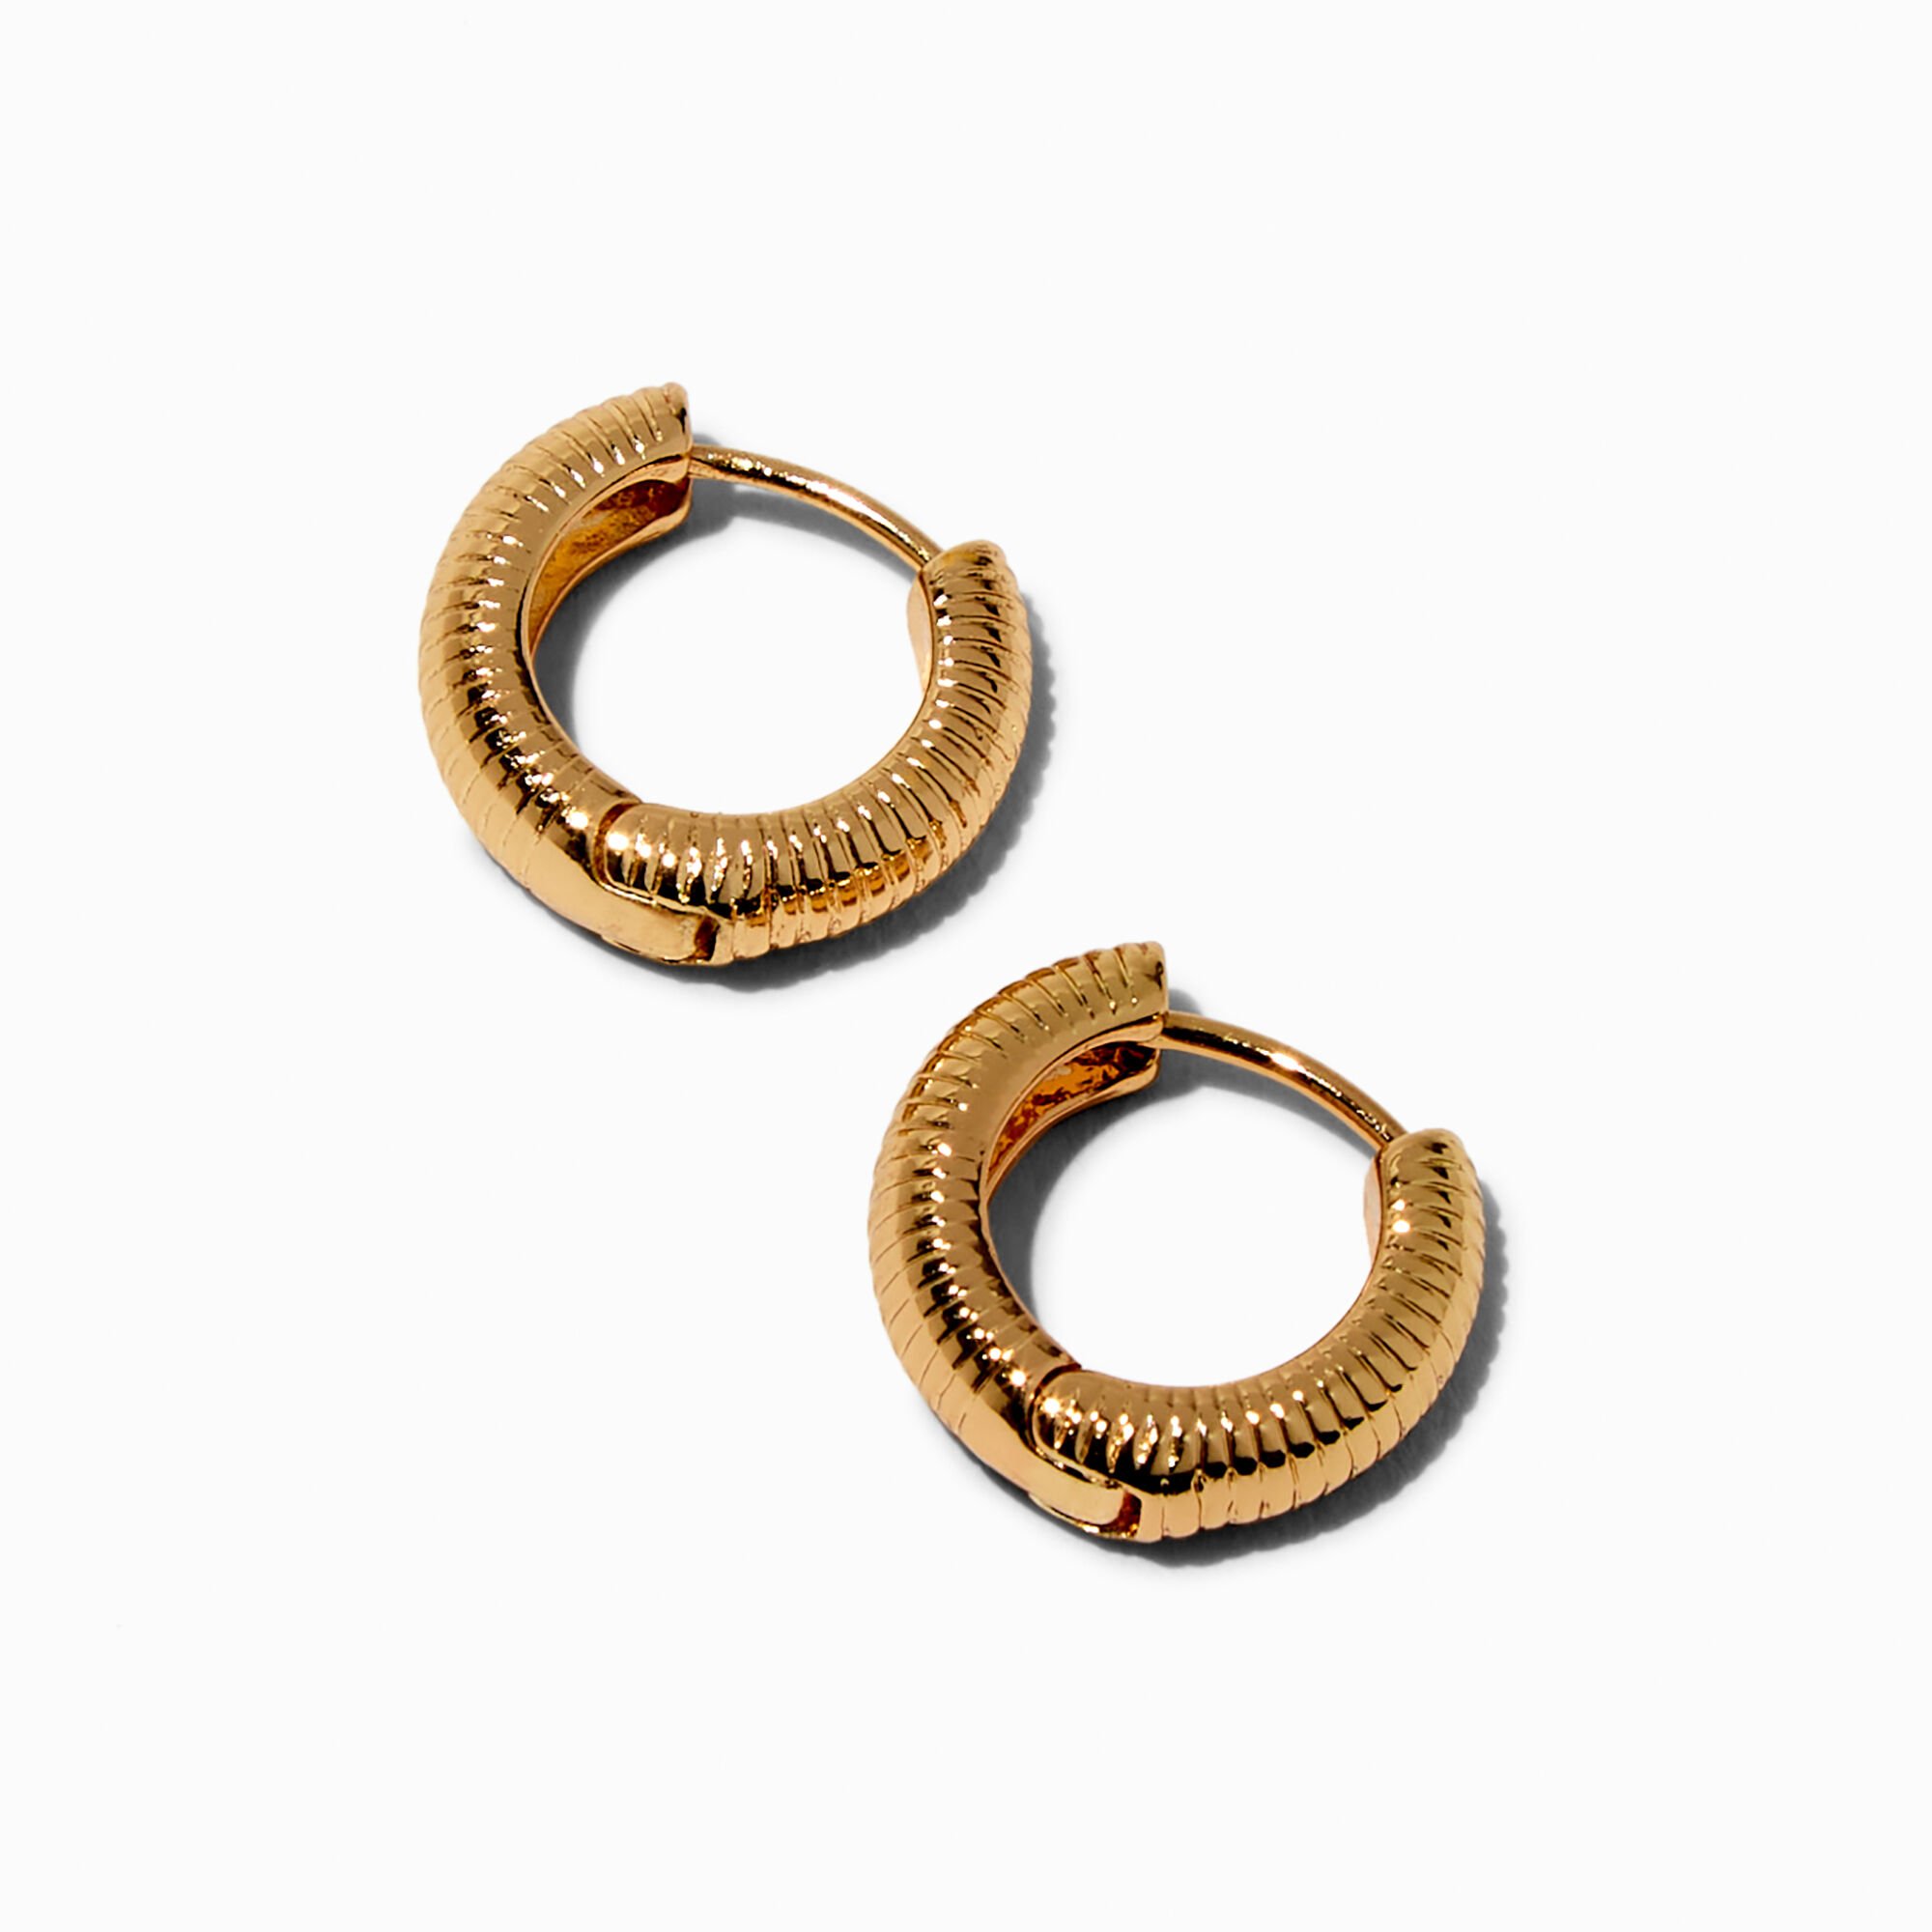 View Claires Tone 10MM Ridged Clicker Hoop Earrings Gold information